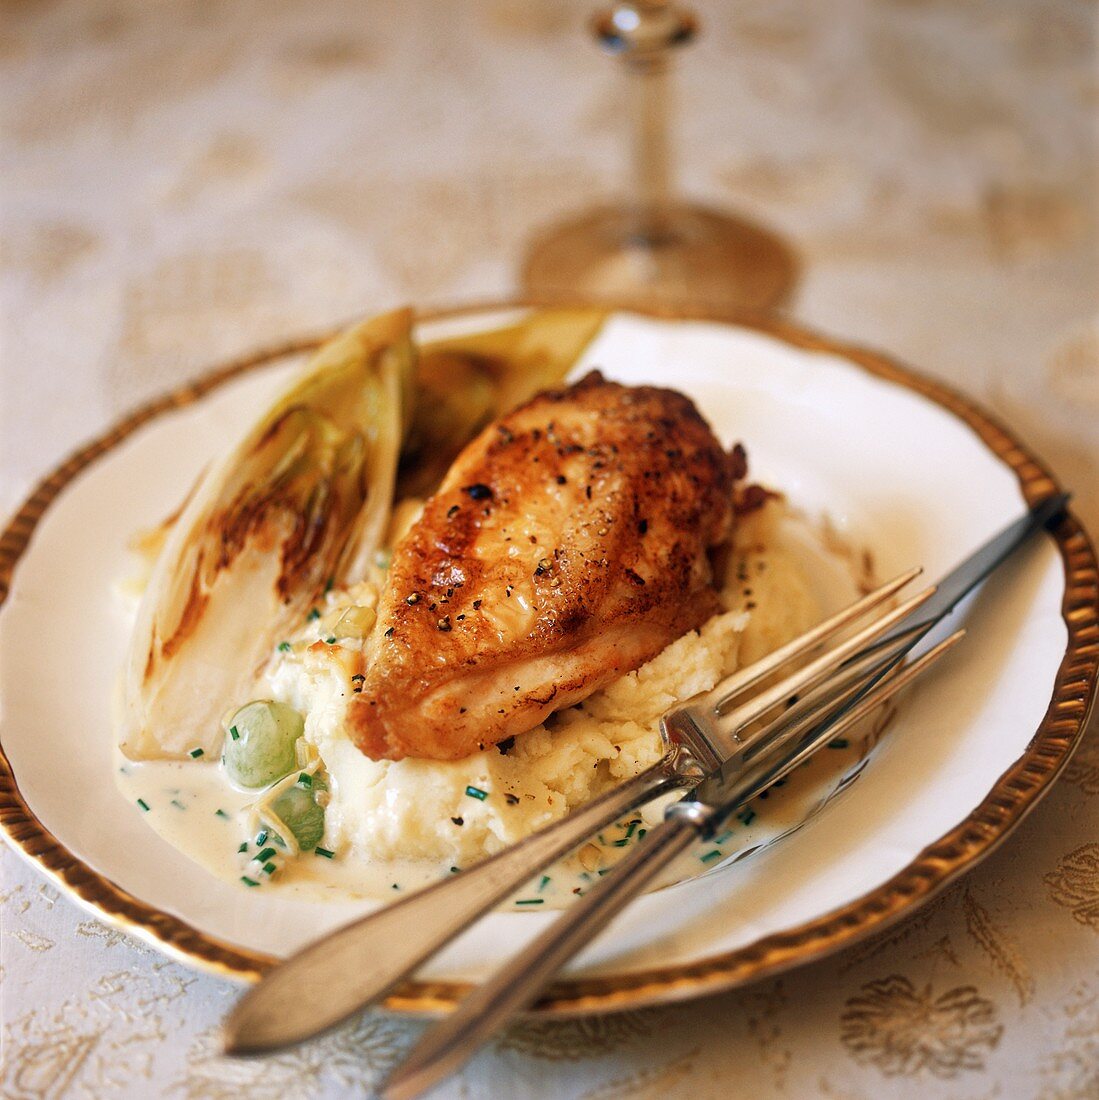 Chicken Breast Over Mashes Potatoes with Grilled Endive